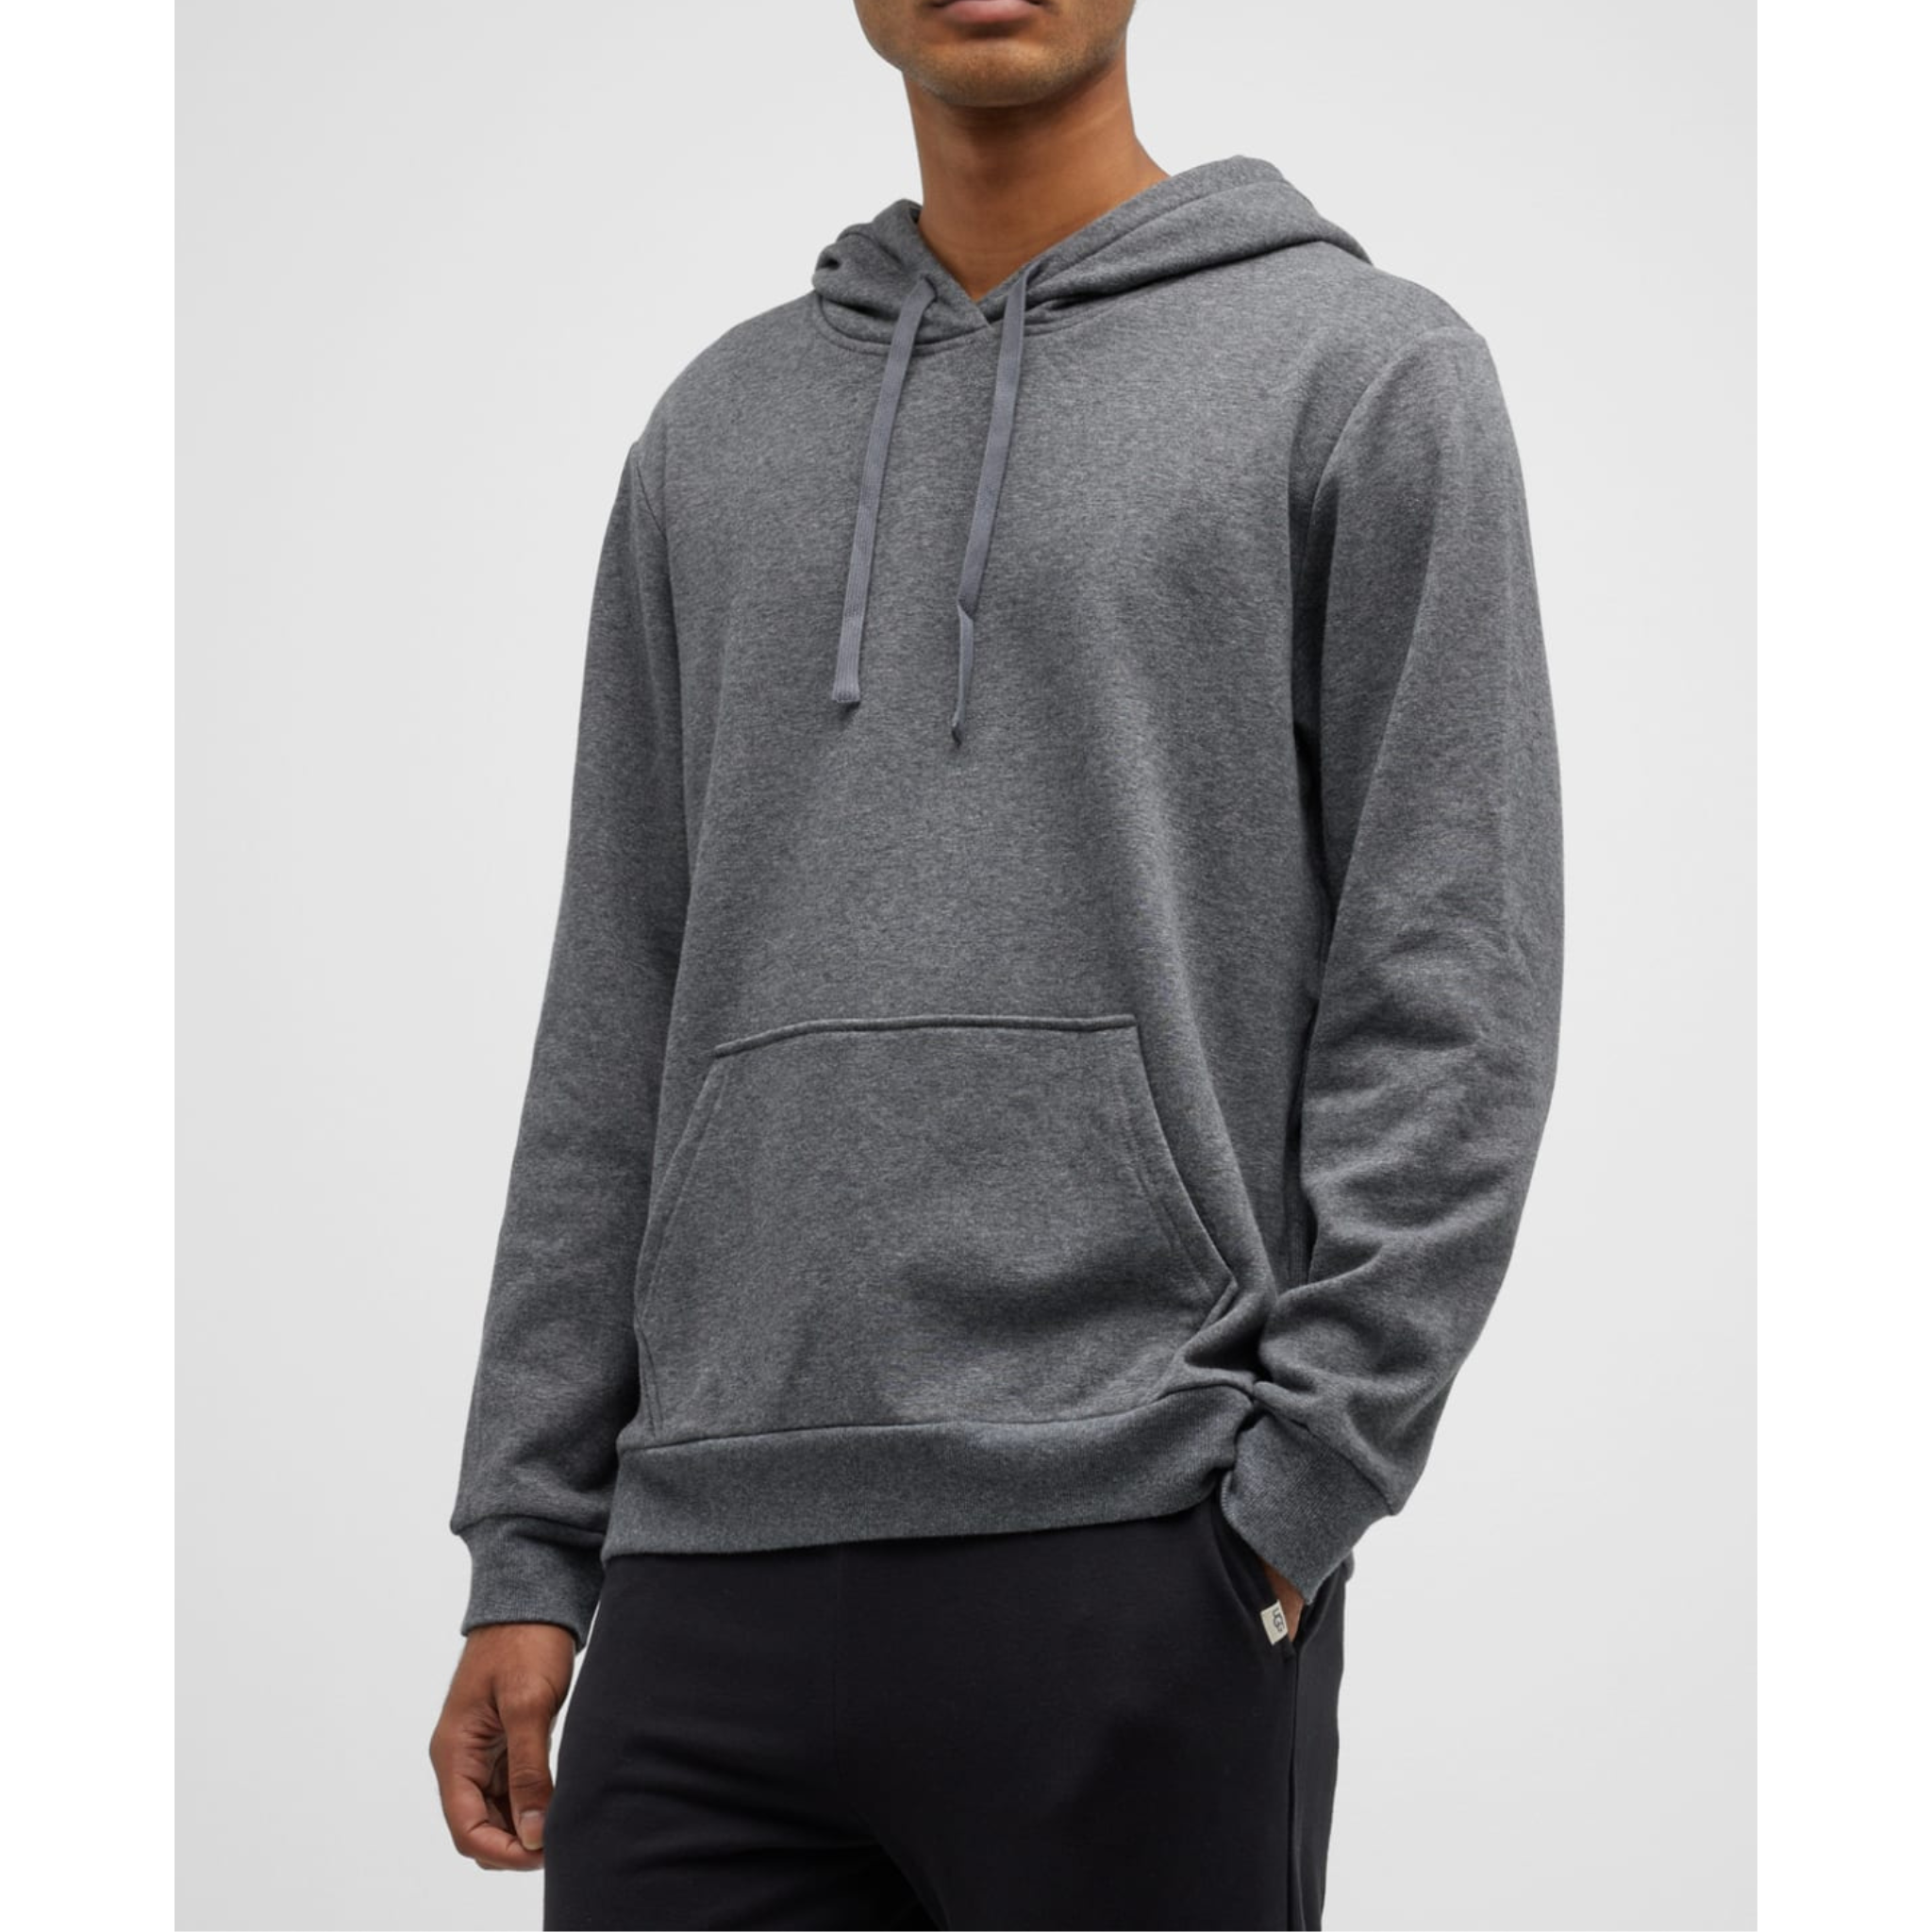 UGG Men's Dax Cotton-Stretch Hoodie (3 COLORS)